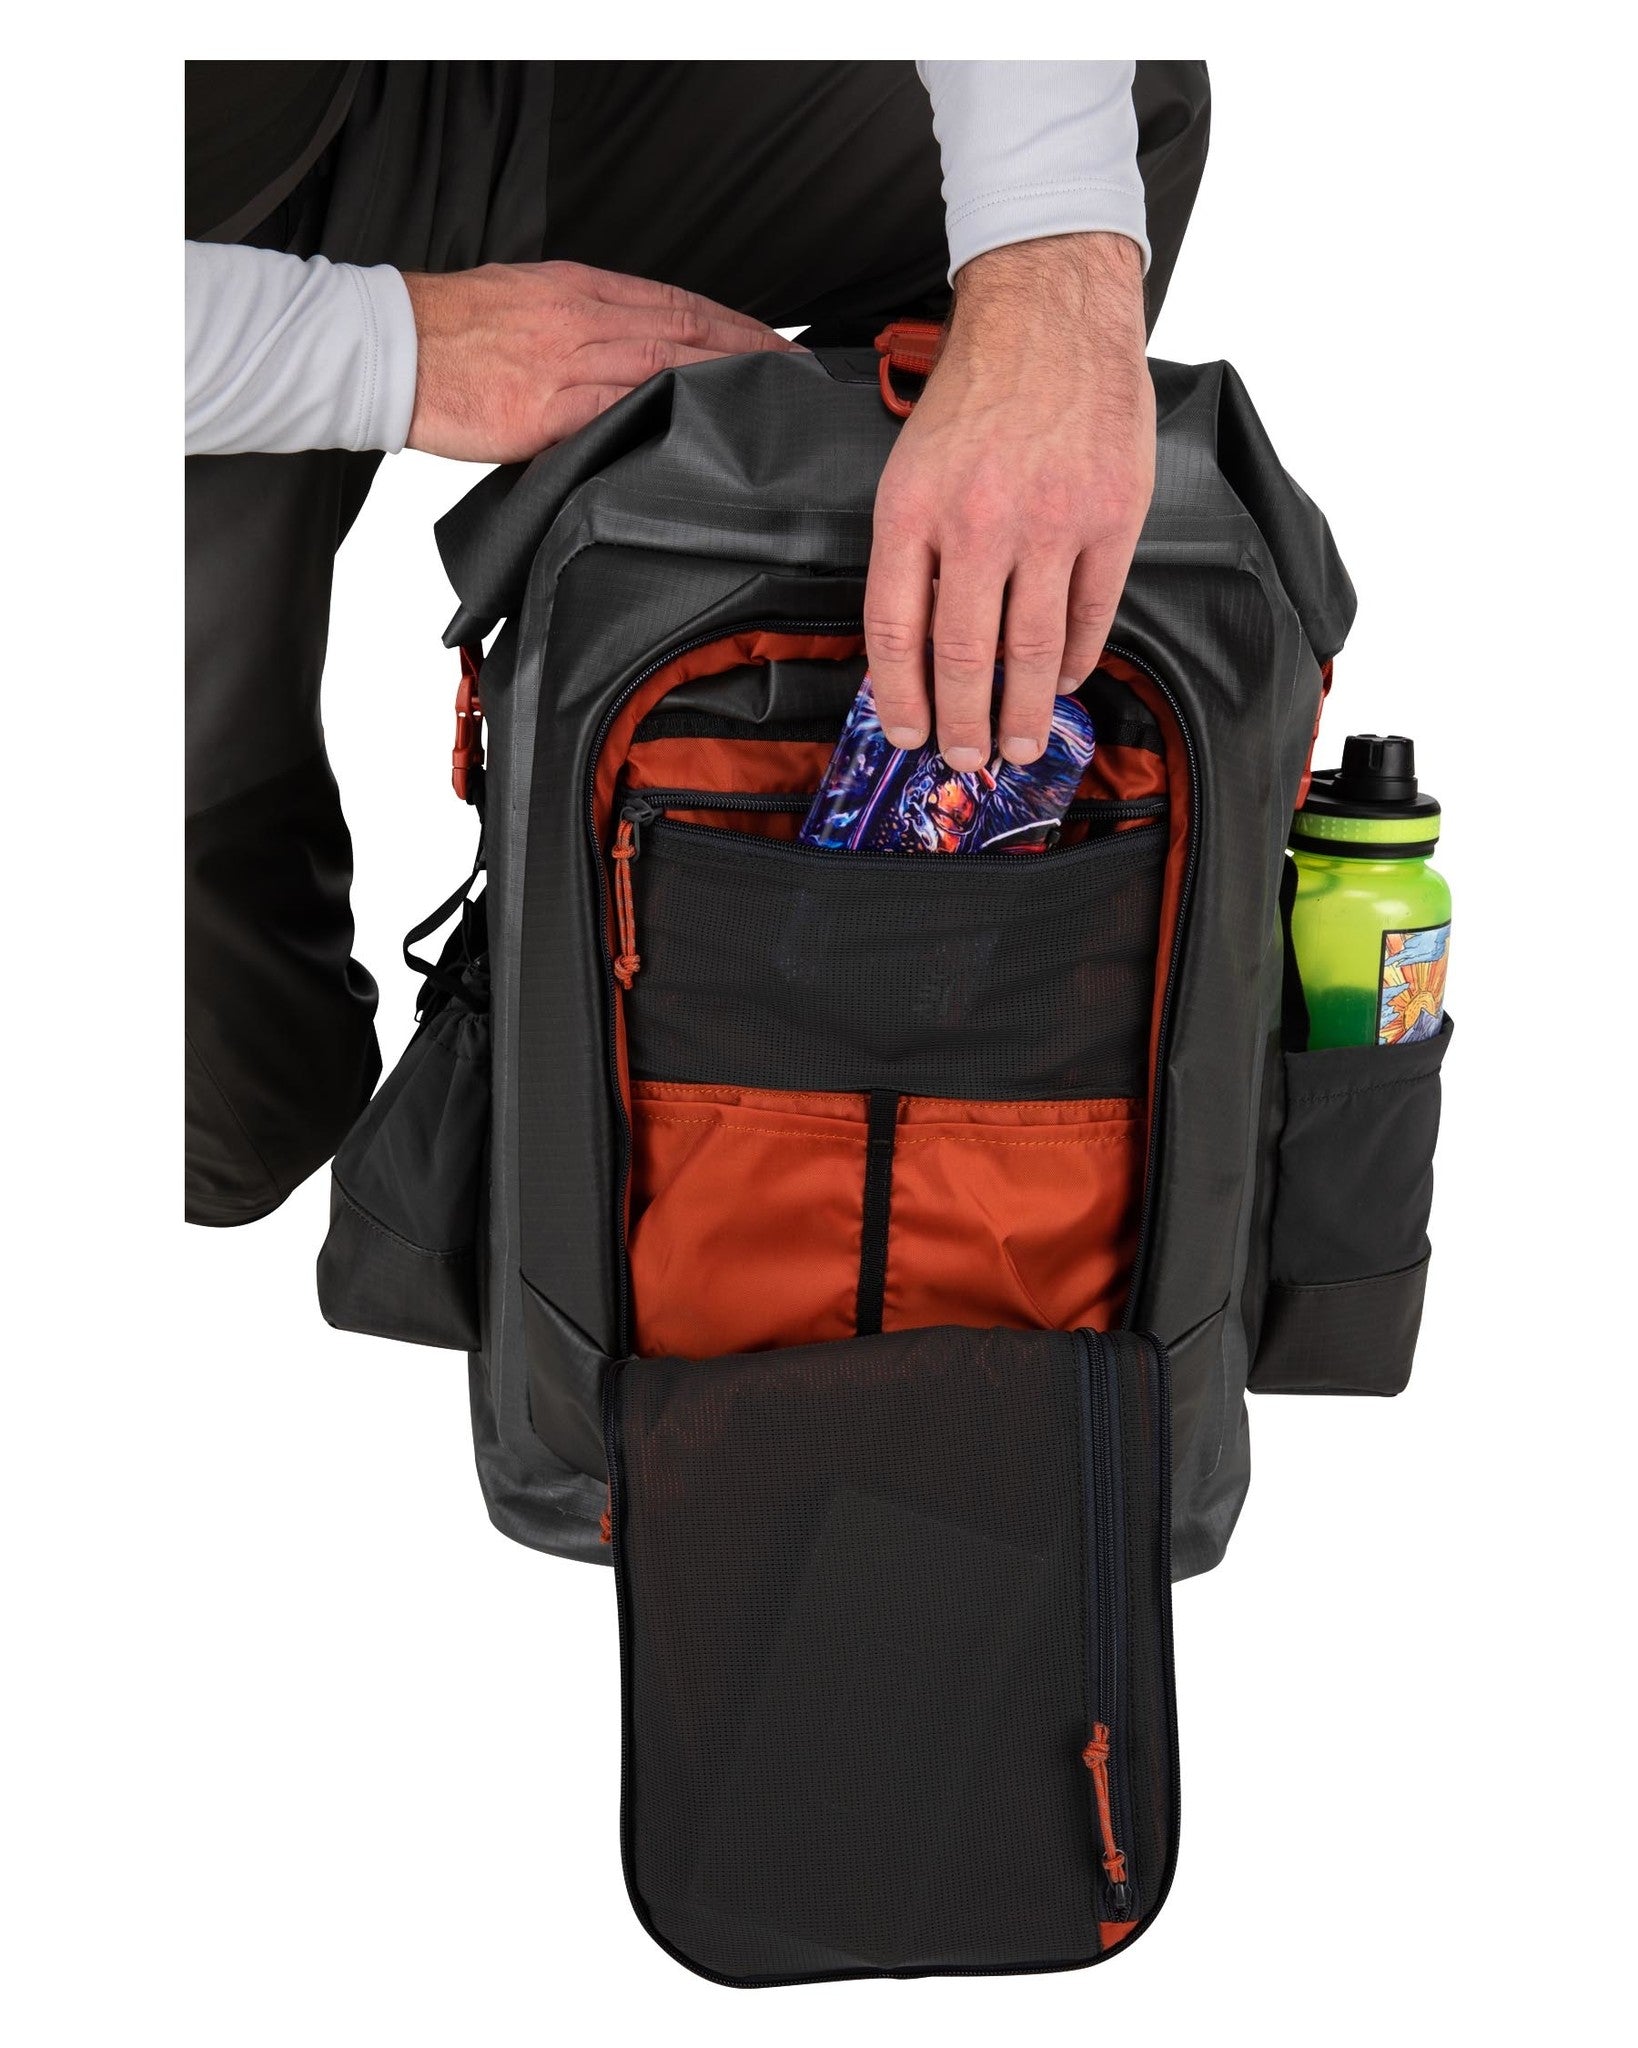 SIMMS G3 GUIDE BACKPACK - NEW FOR 2022!